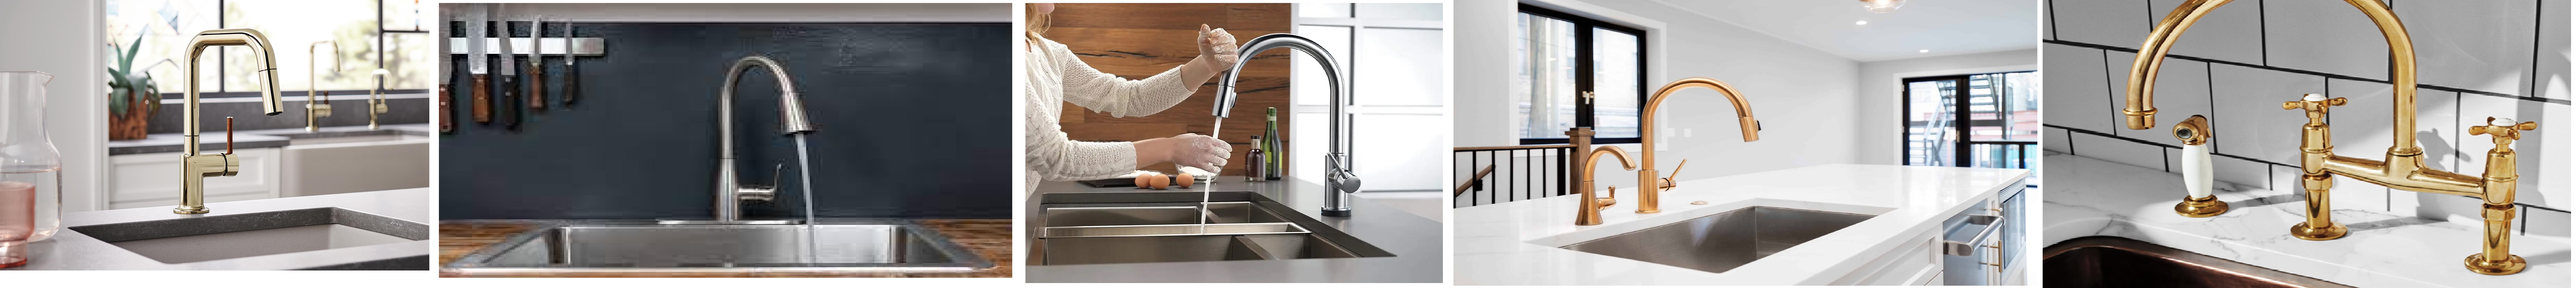 Touchless Kitchen Faucets Lowes